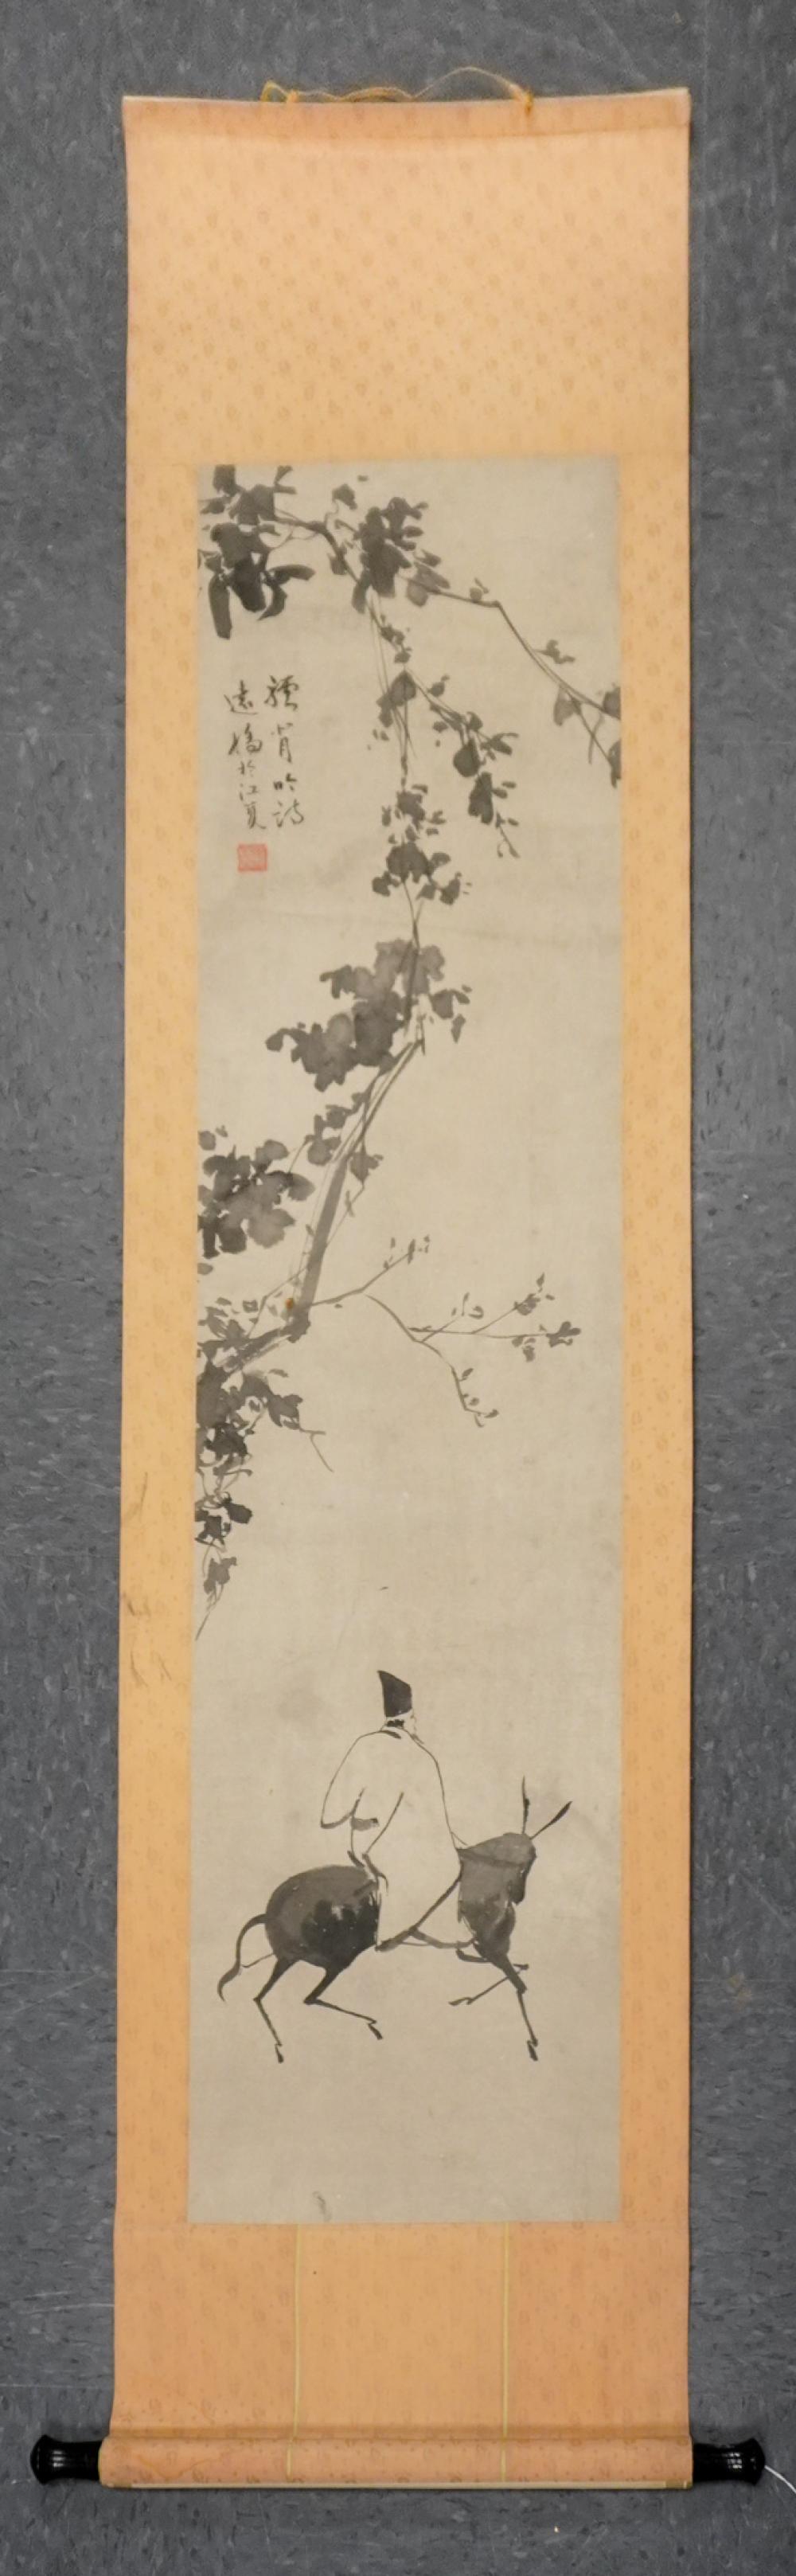 CHINESE PRINTED HANGING SCROLL  2e82f6